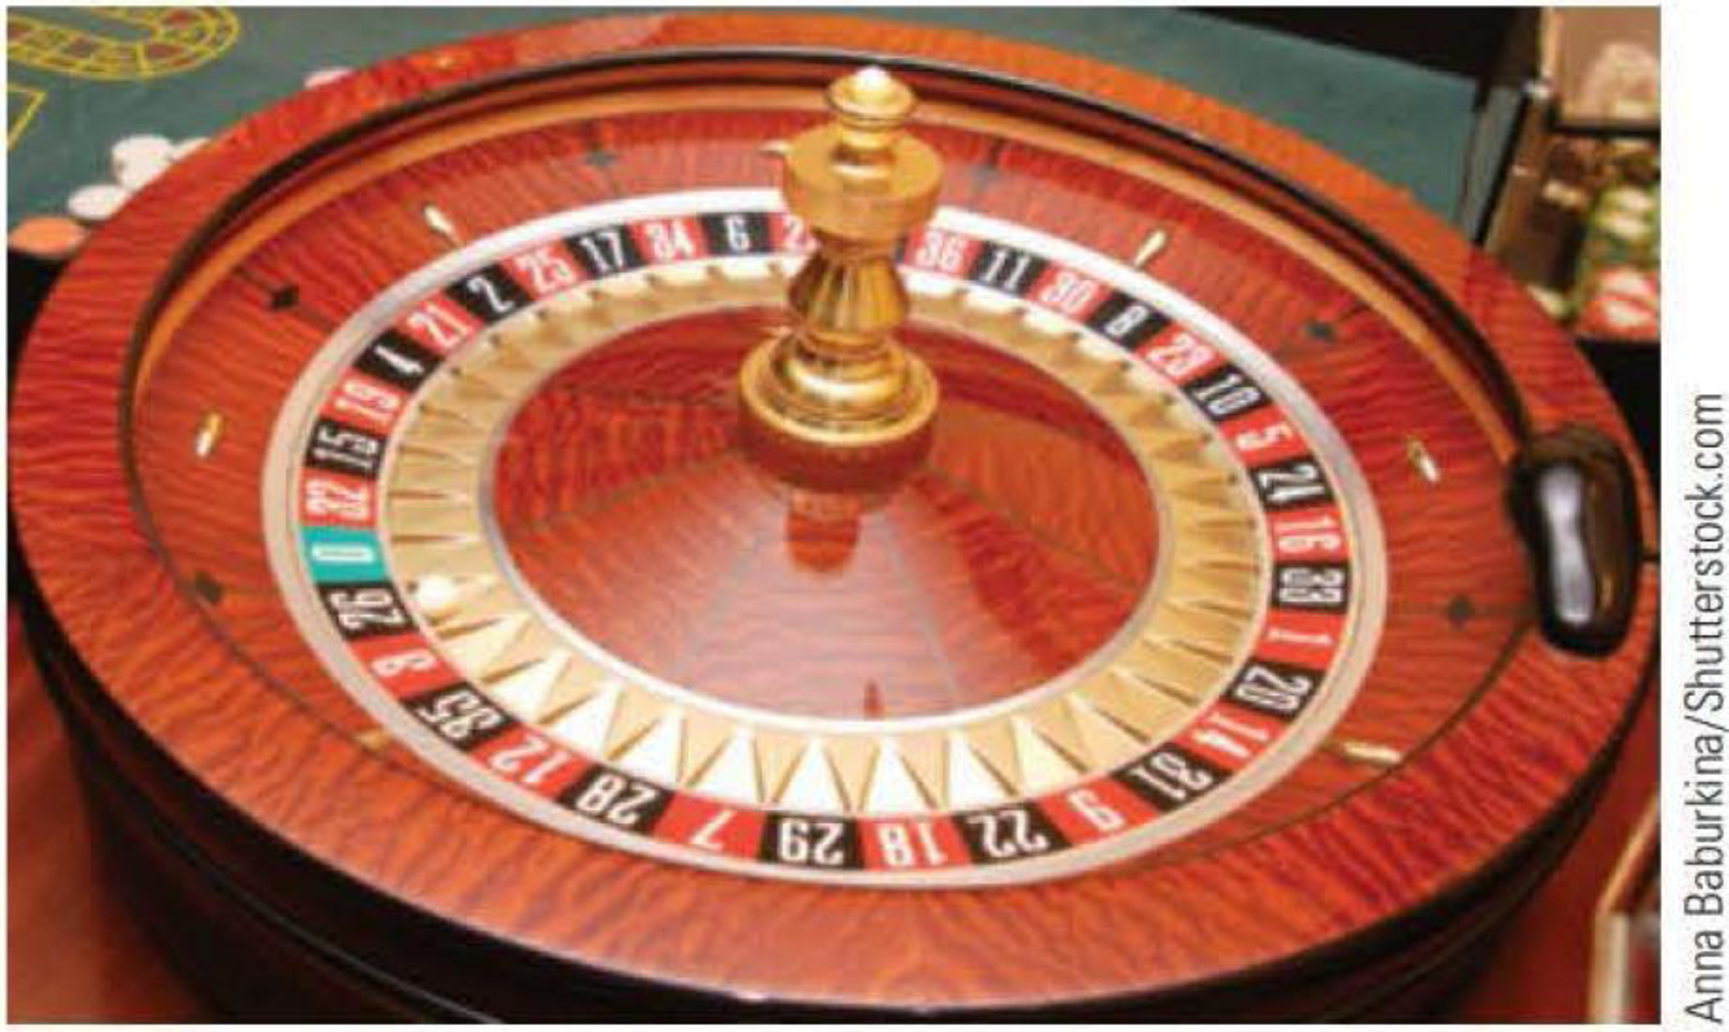 Chapter 6.3, Problem 24E, Roulette is a game of chance that involves spinning a wheel that is divided into 38 equal segments, 